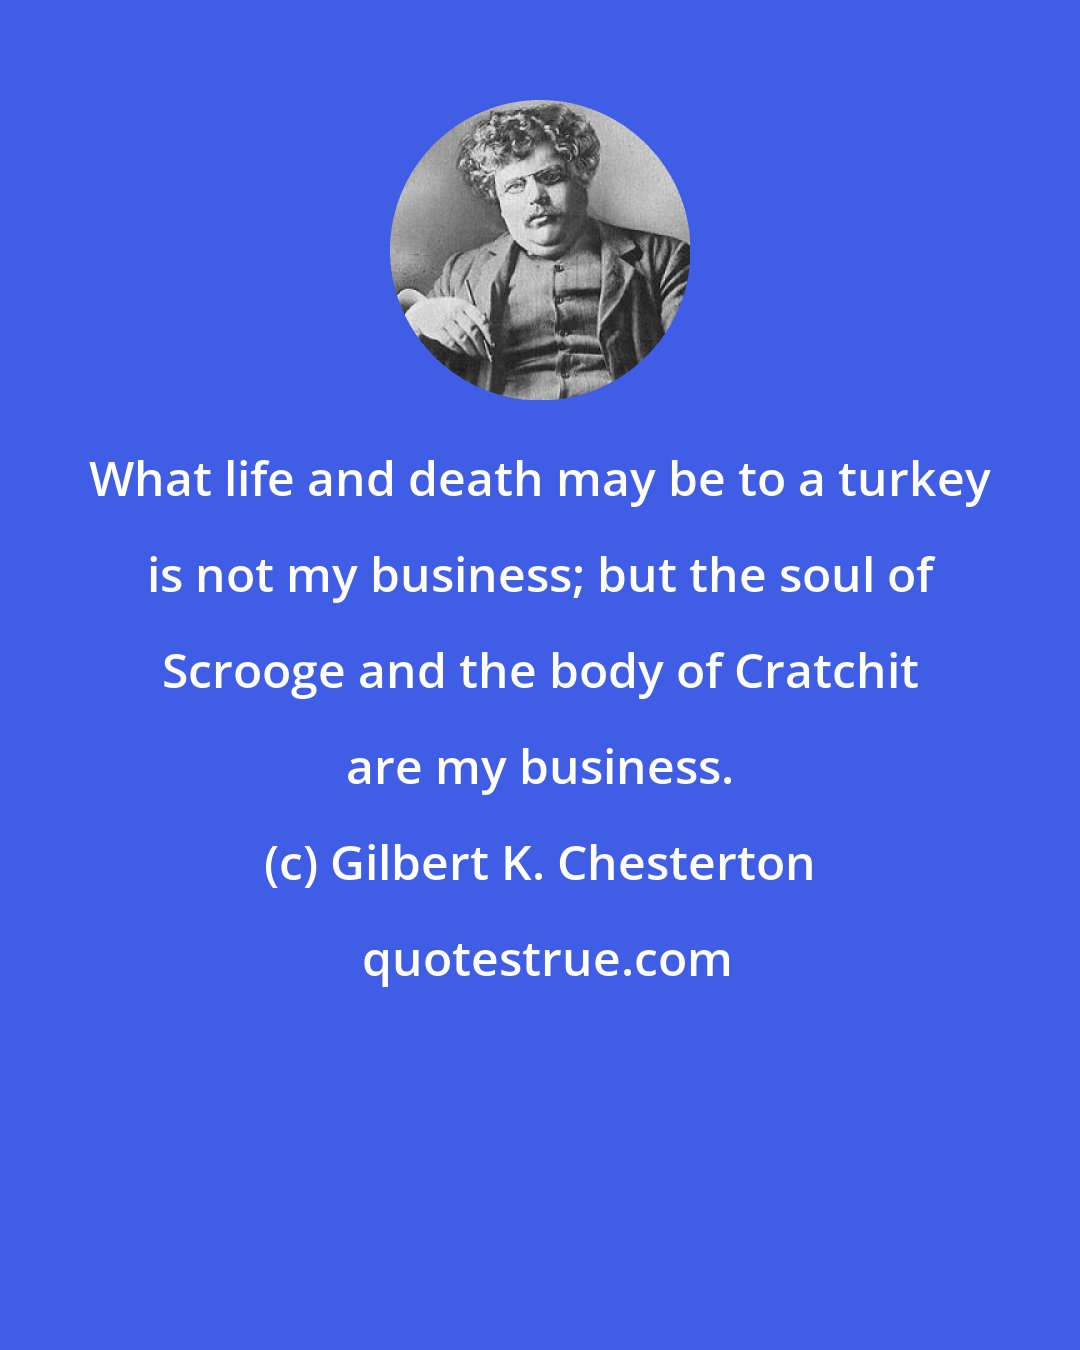 Gilbert K. Chesterton: What life and death may be to a turkey is not my business; but the soul of Scrooge and the body of Cratchit are my business.